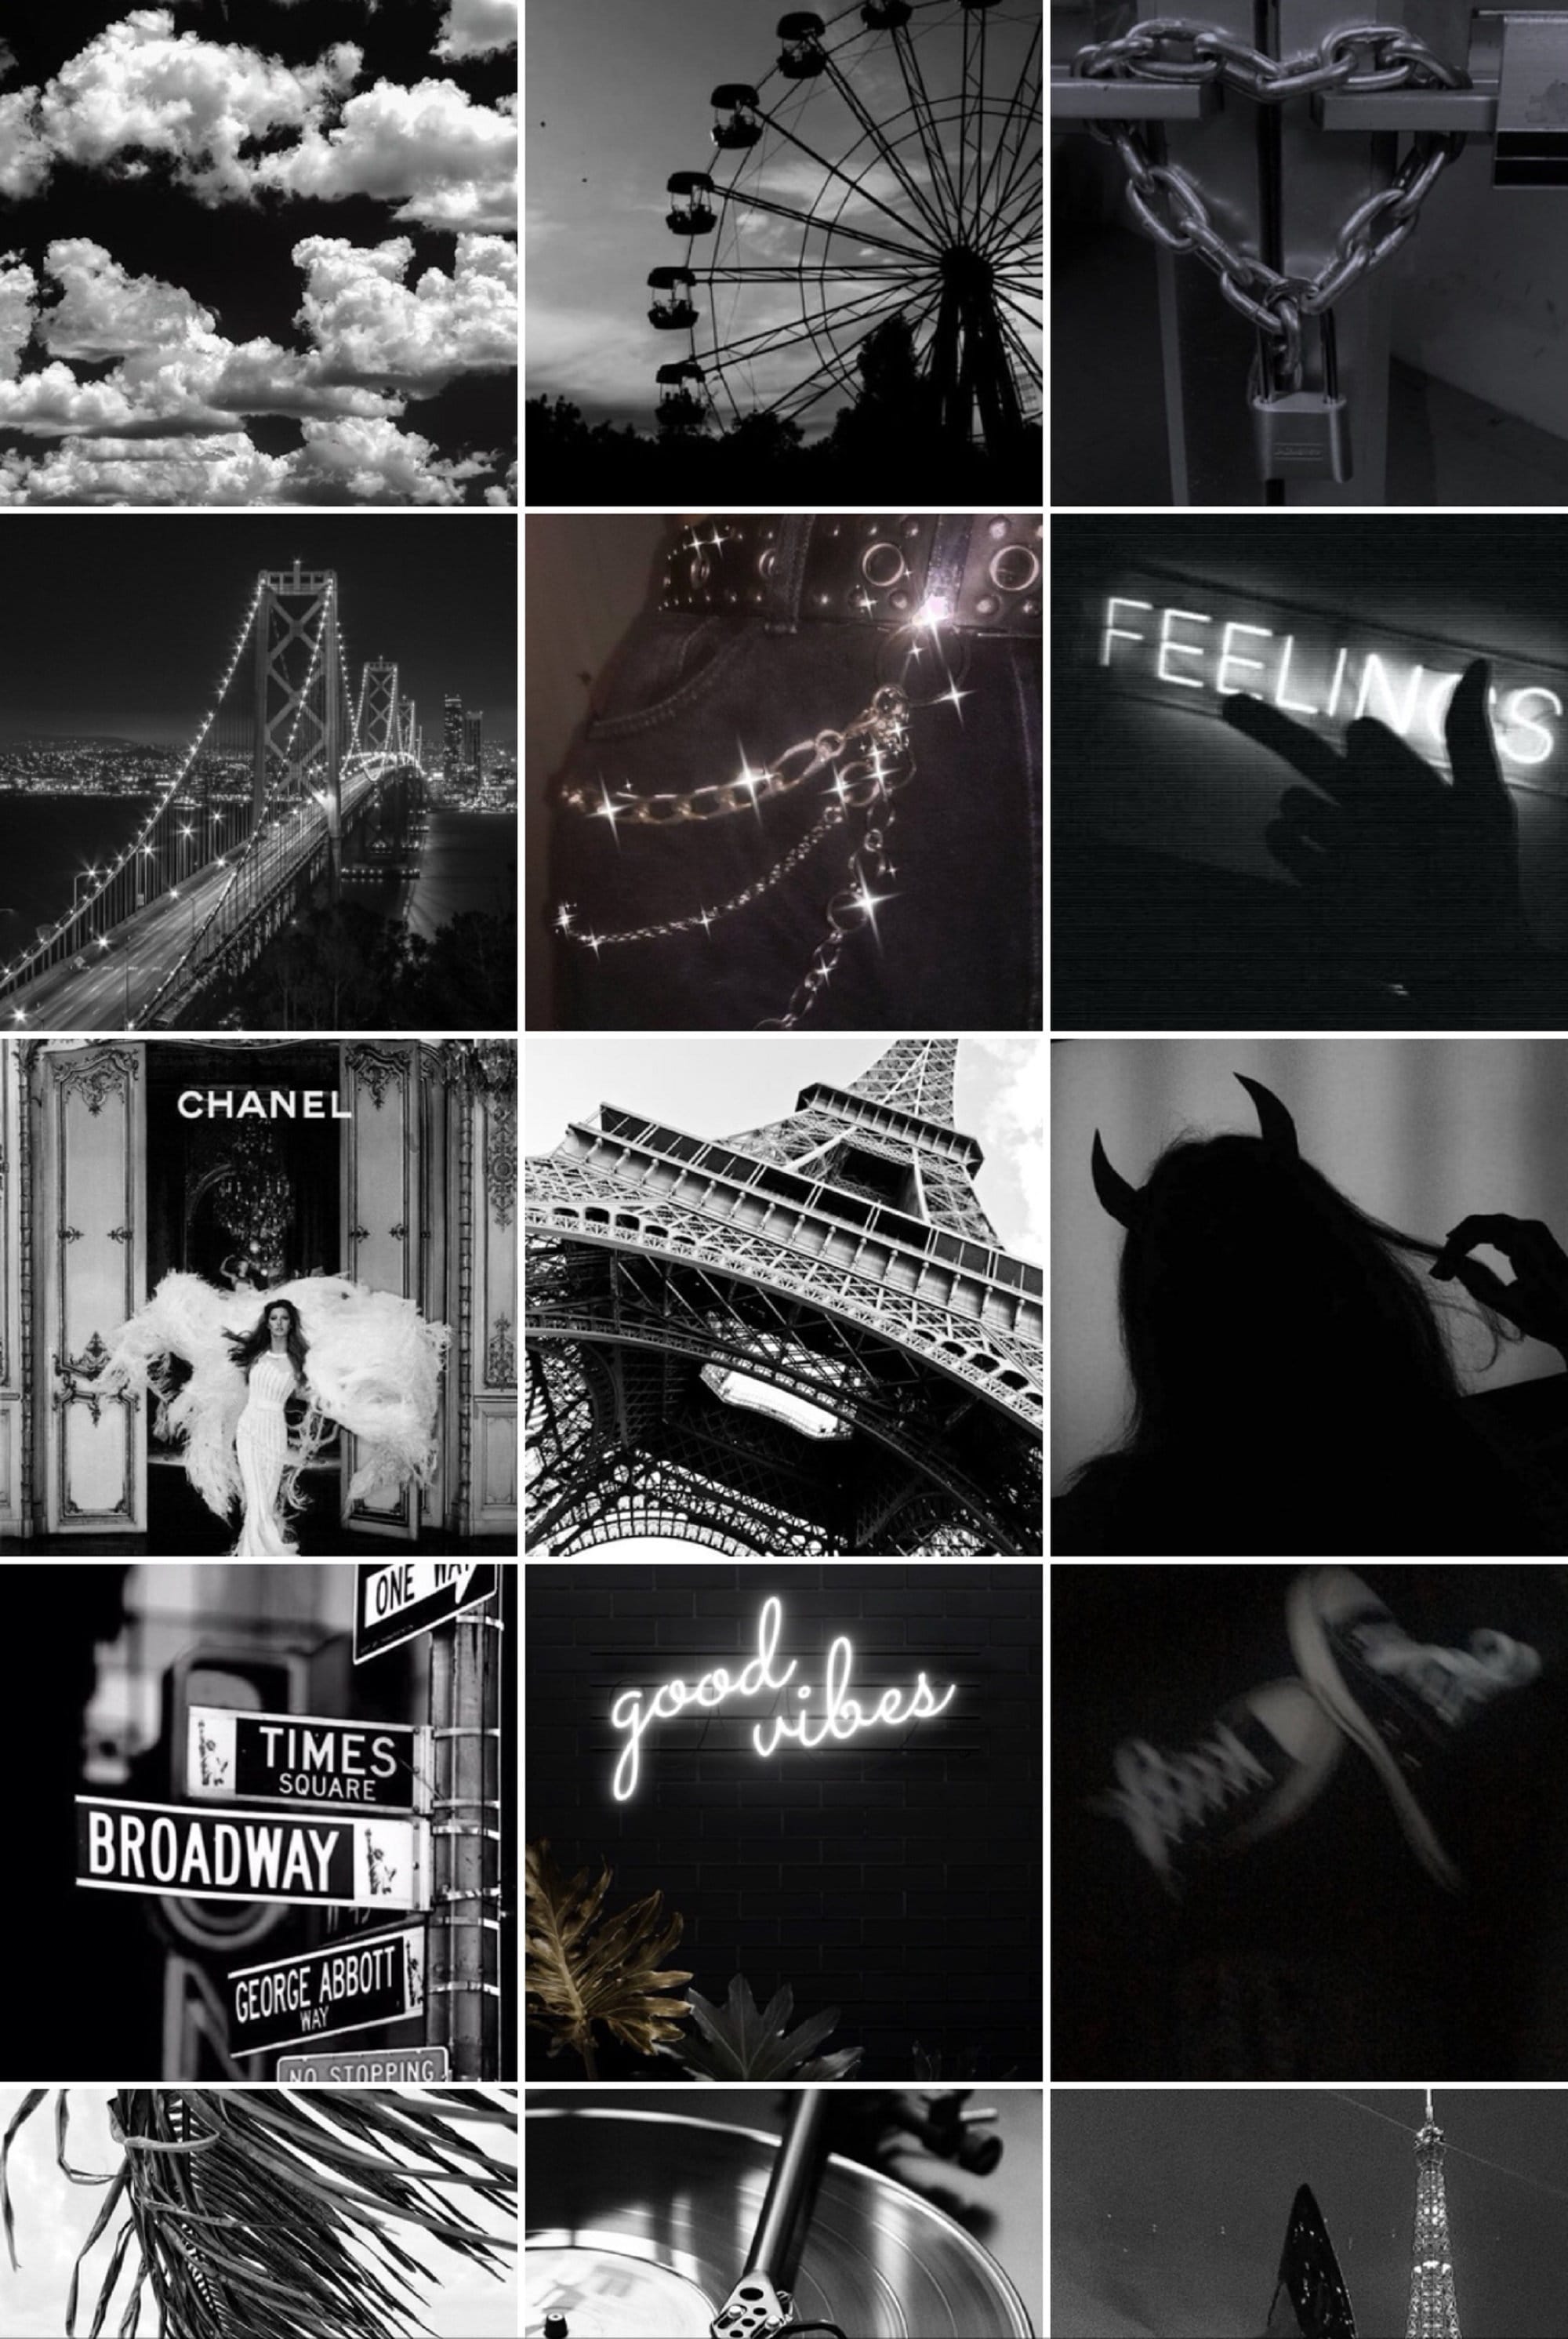 A collage of pictures with different signs and buildings - Broadway